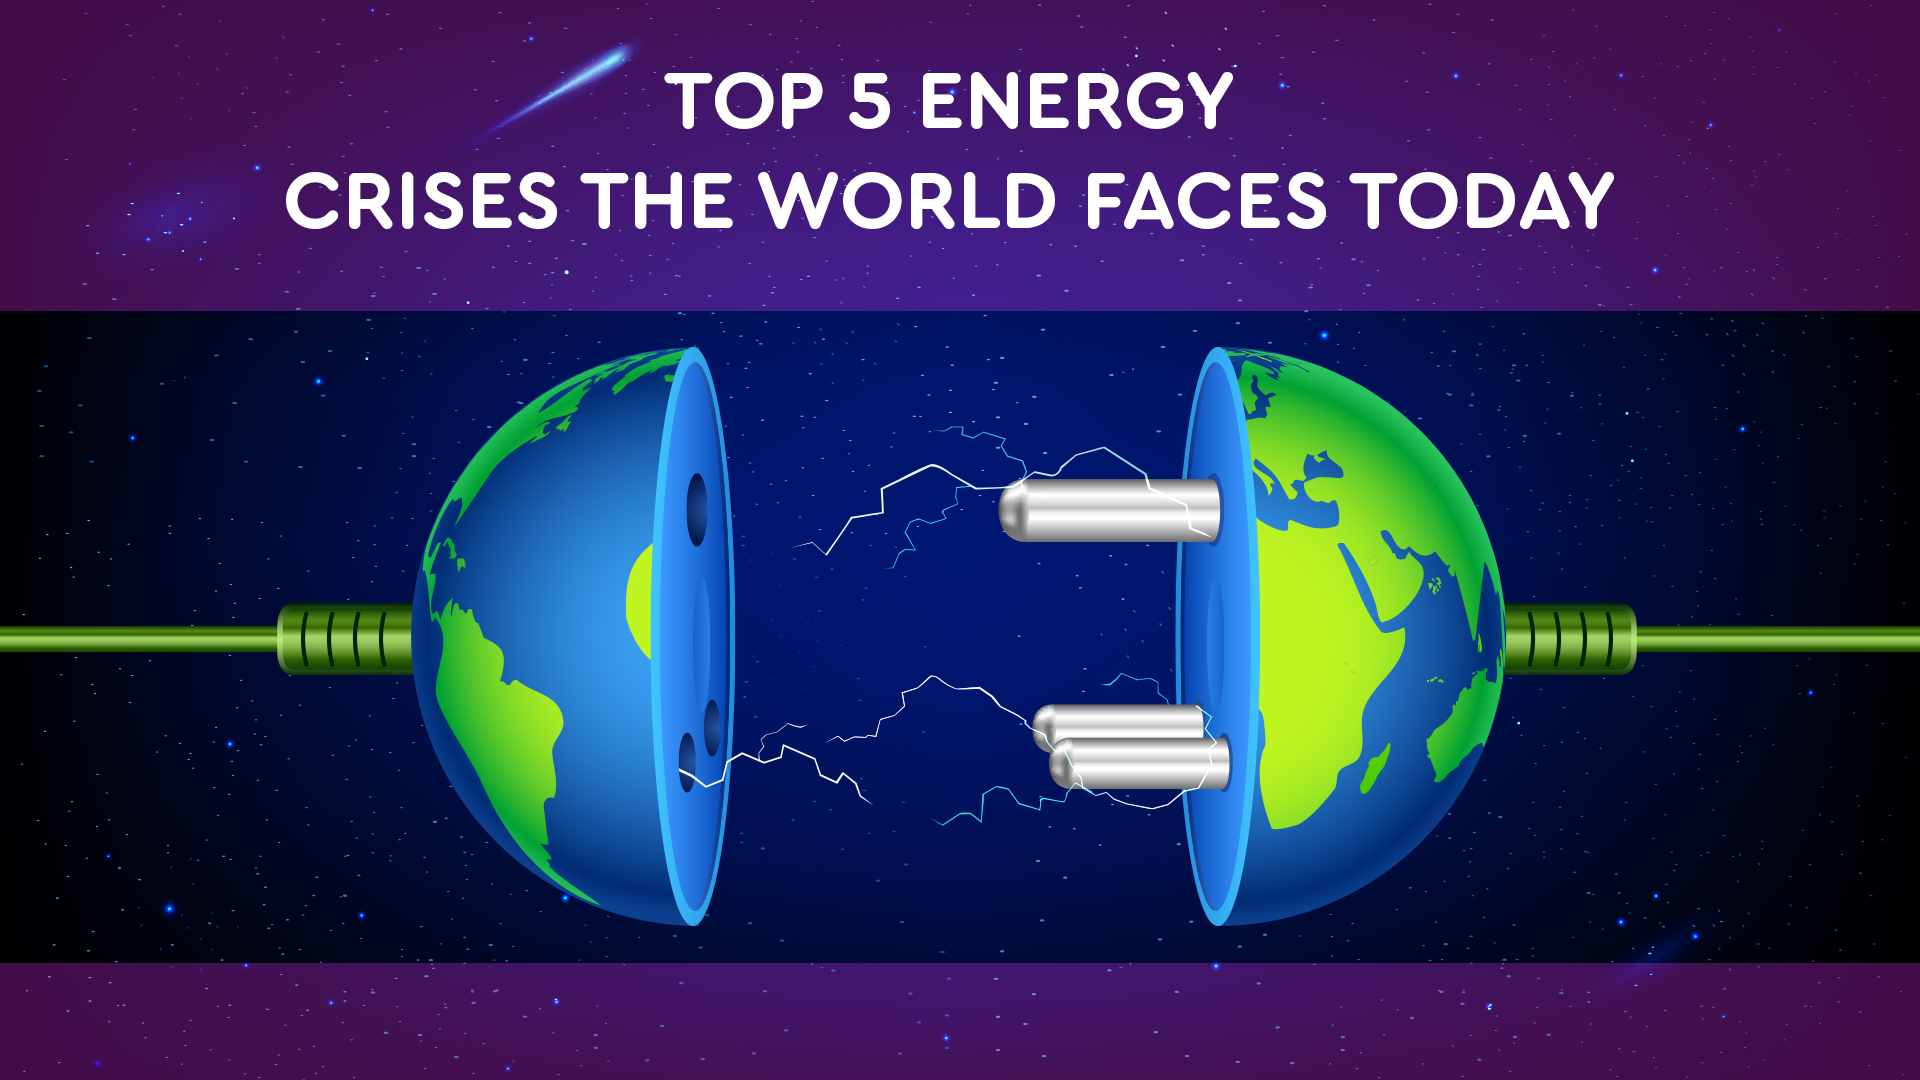 Top 5 Energy Crises the World Is Facing Today